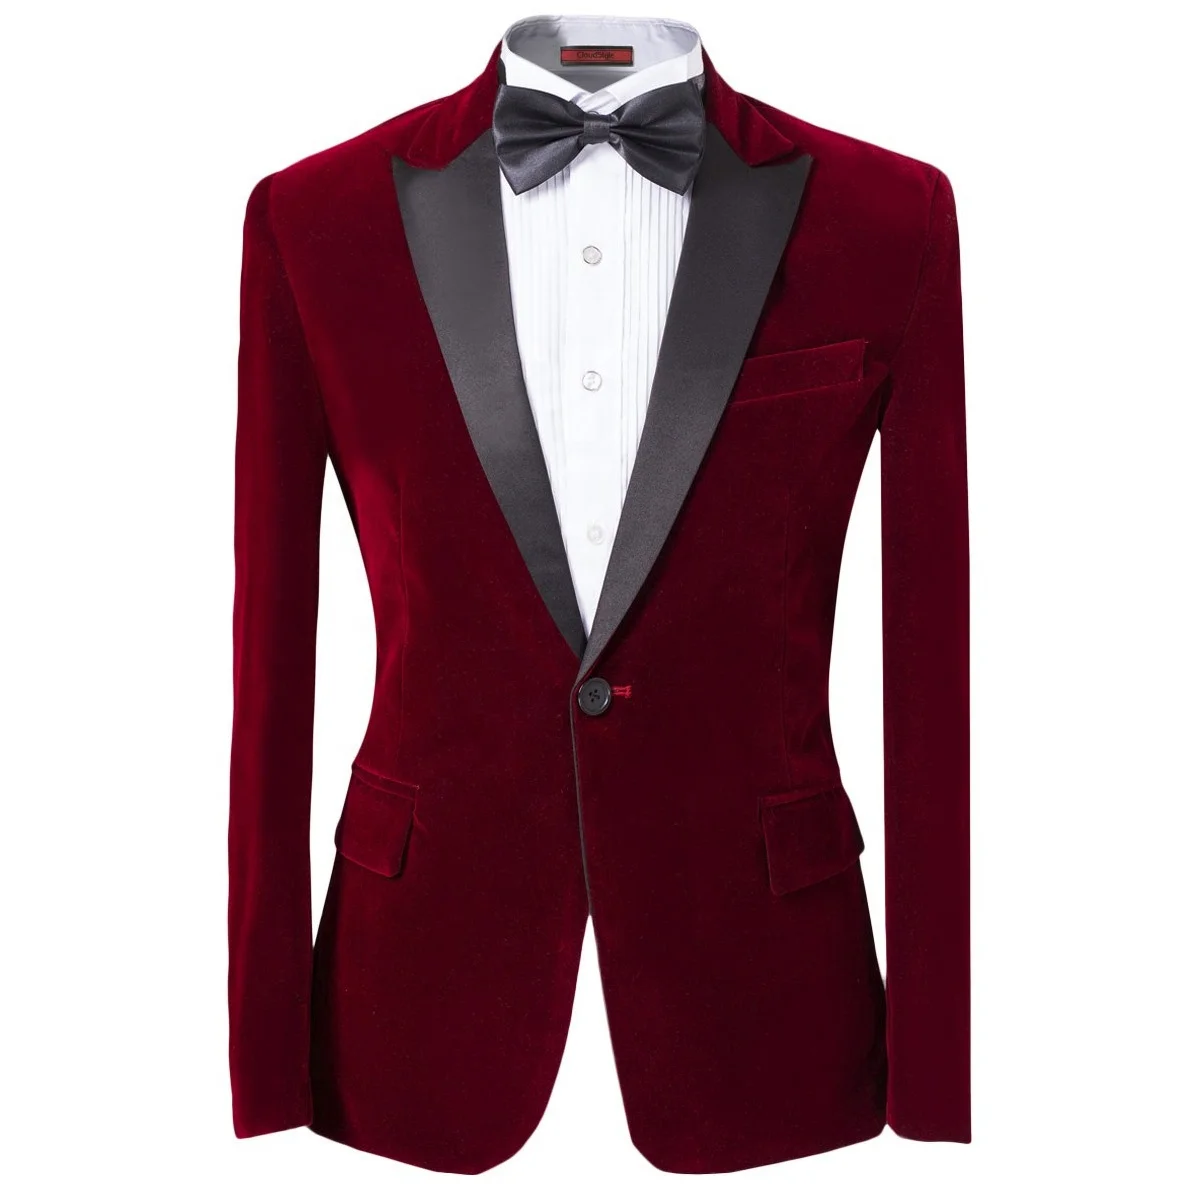 2019 new style modern fit men casual jackets blazer velvet suit made in china